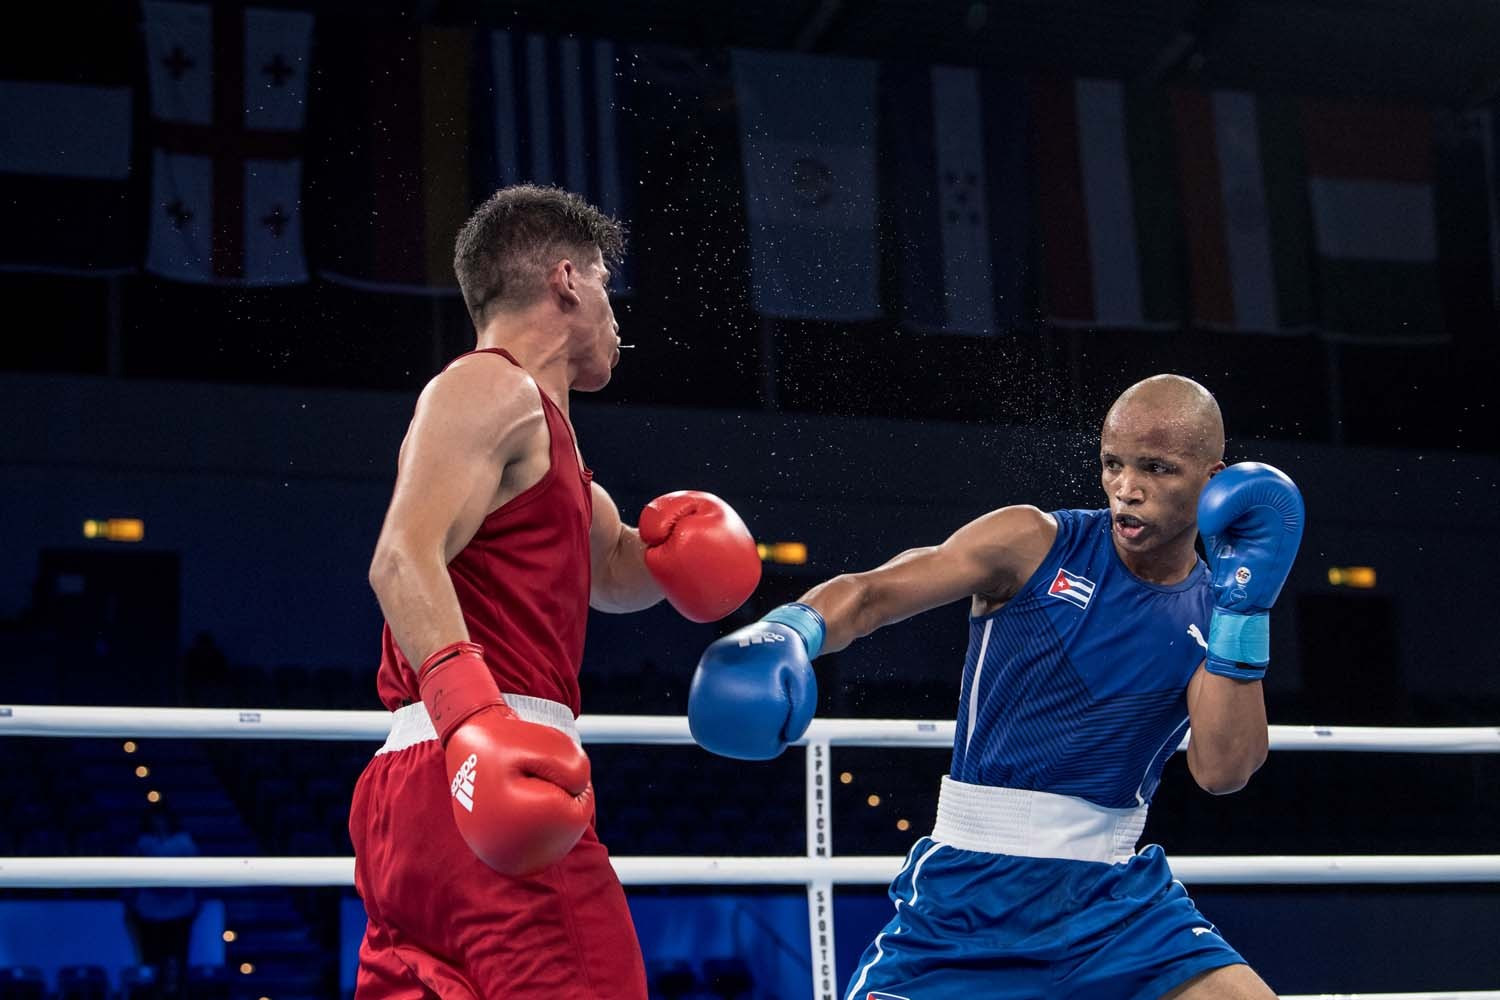 Former Olympic and world light welterweight champion Roniel Iglesias of Cuba proved too strong for Jordan's Zeyad Eashash at welterweight ©AIBA